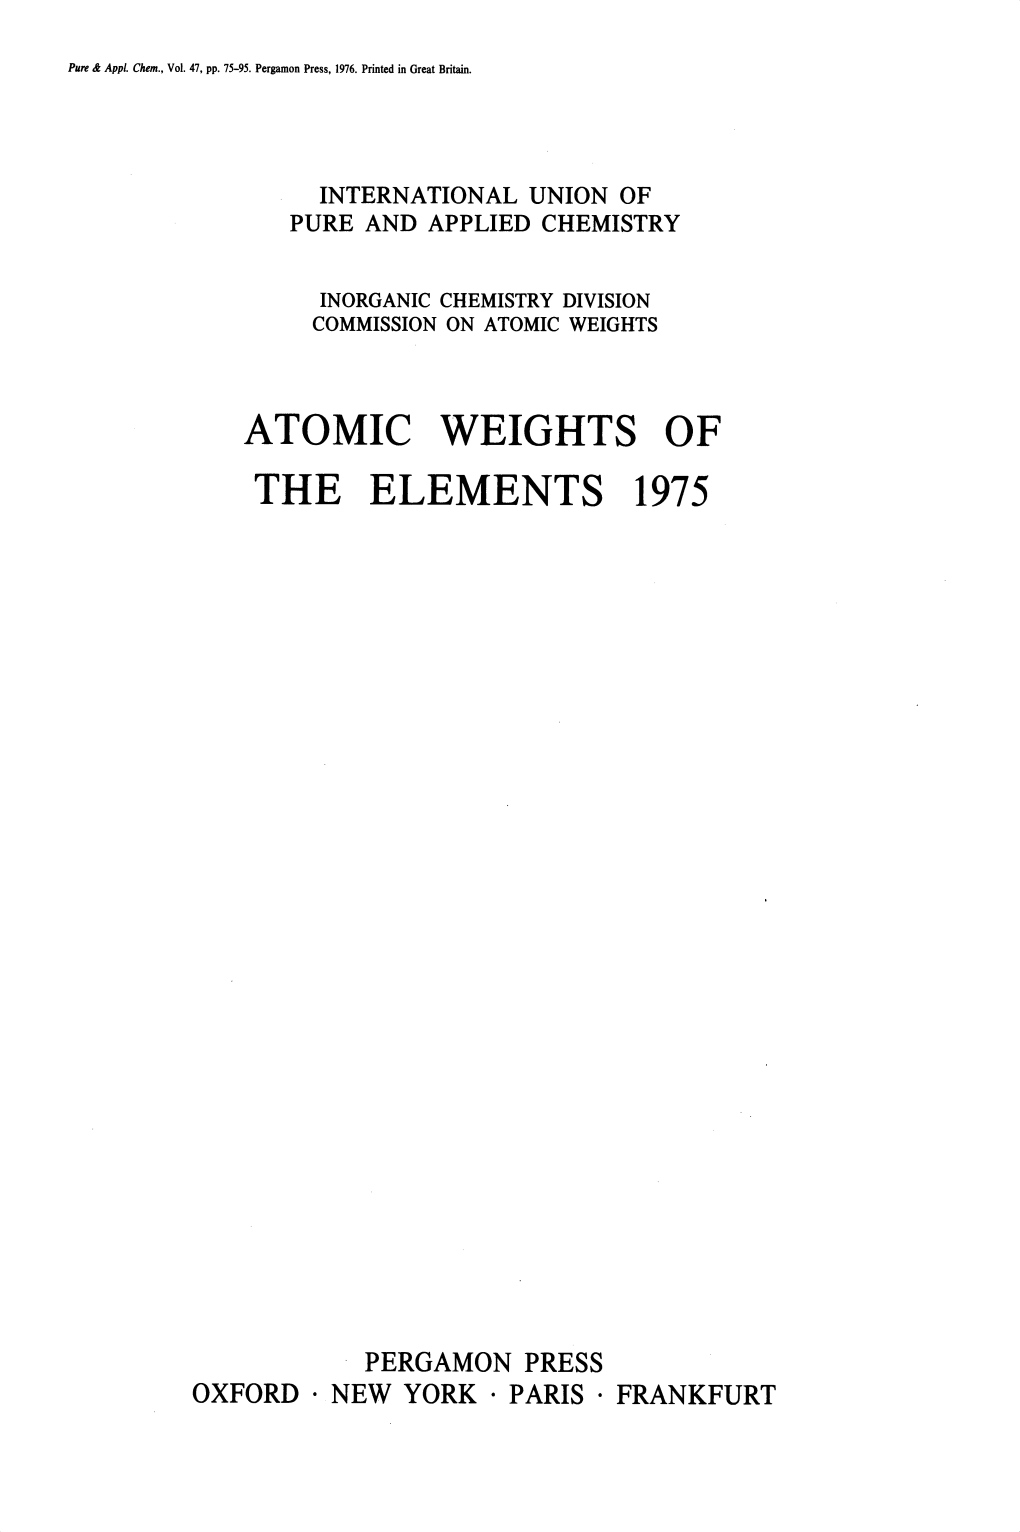 Atomic Weights of the Elements 1975